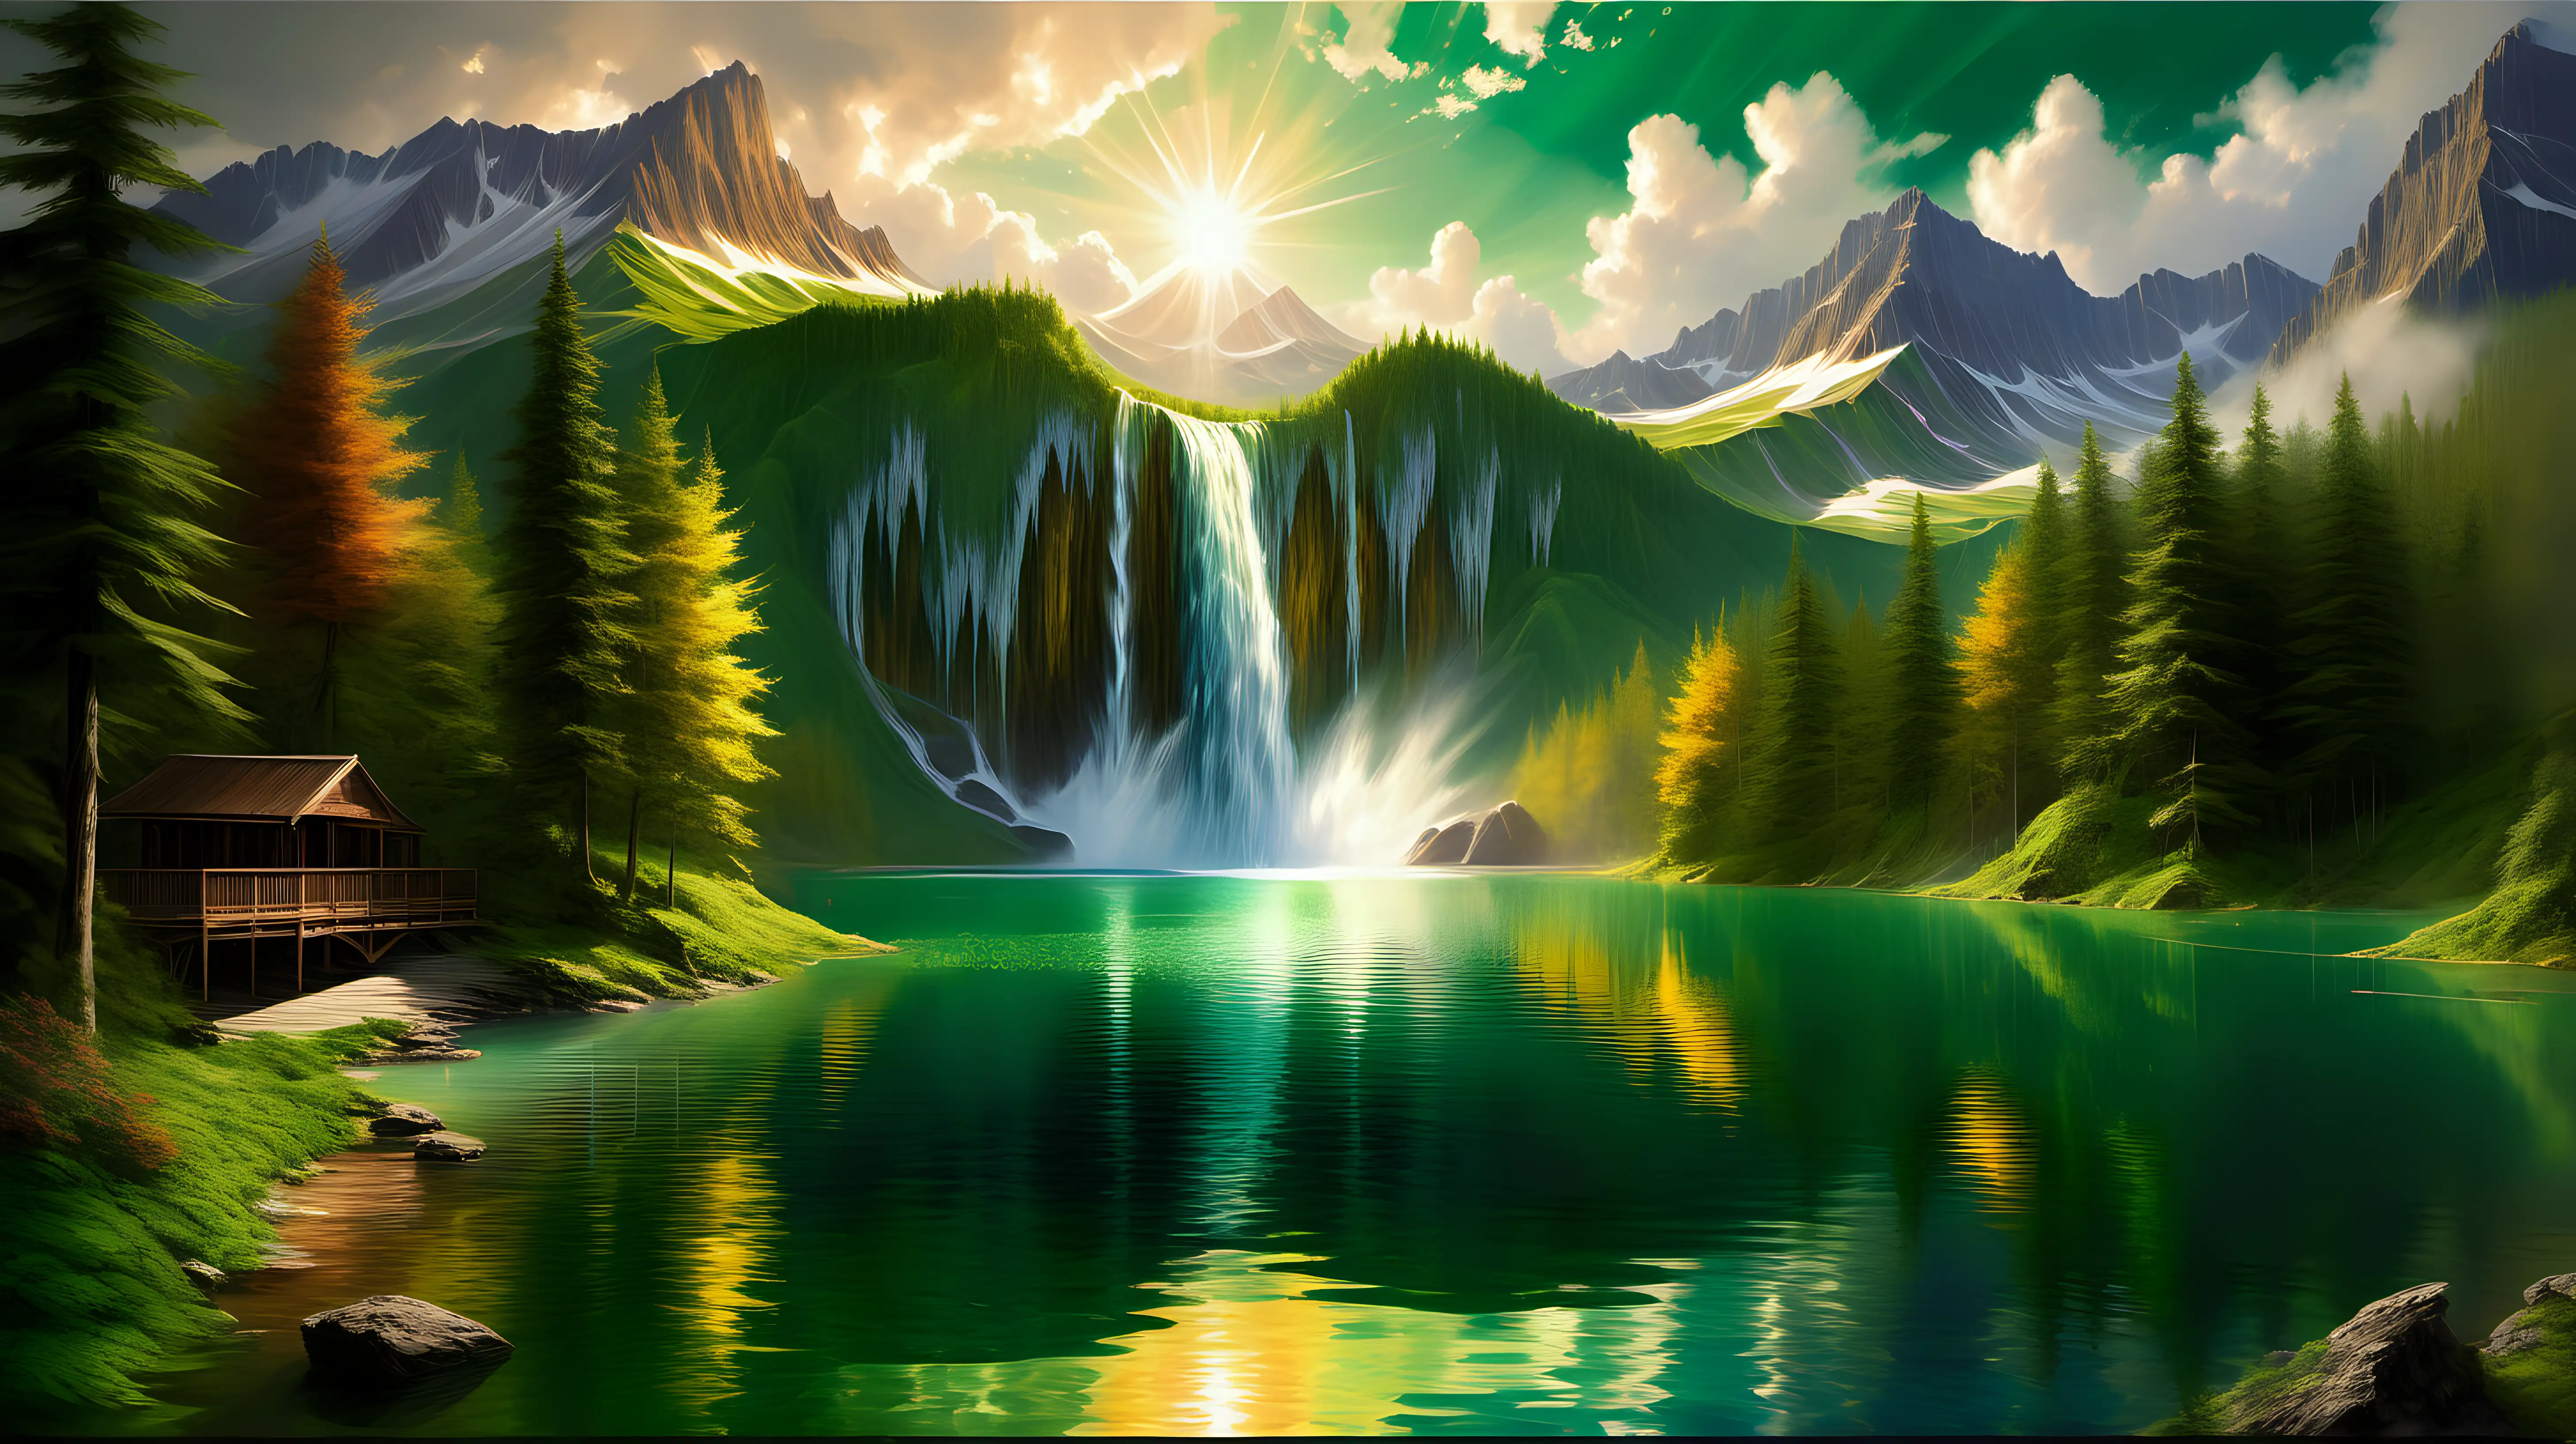 Wide mountain scene with a gorgeous waterfall cascading into an emerald lake, the water golden with multi-colored reflections caused by the light of an Ultra Dimensioned Sun. Lush vegetation and spectacular cloud-shrouded ridges. All in impressive graphic quality. The scene appears to be a realistic painting